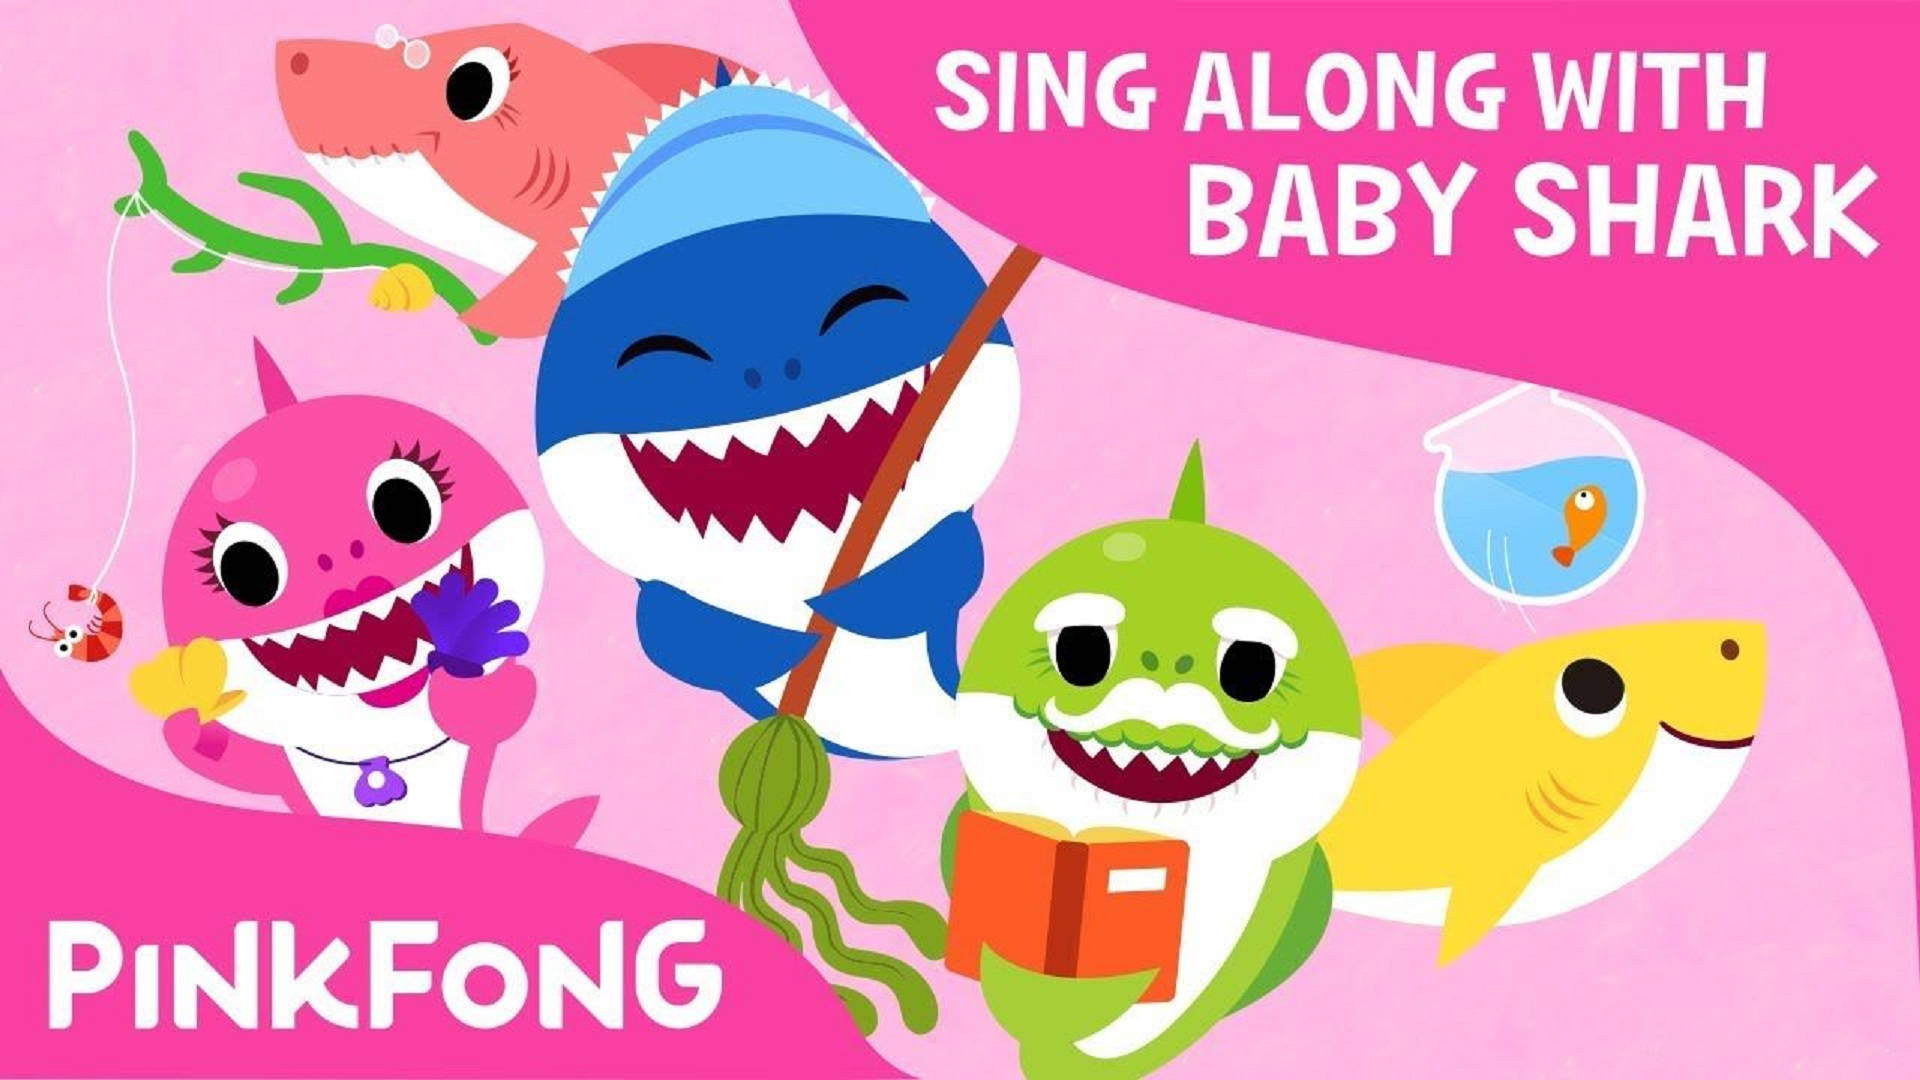 Pinkfong Sing Along With Baby Shark Wallpaper